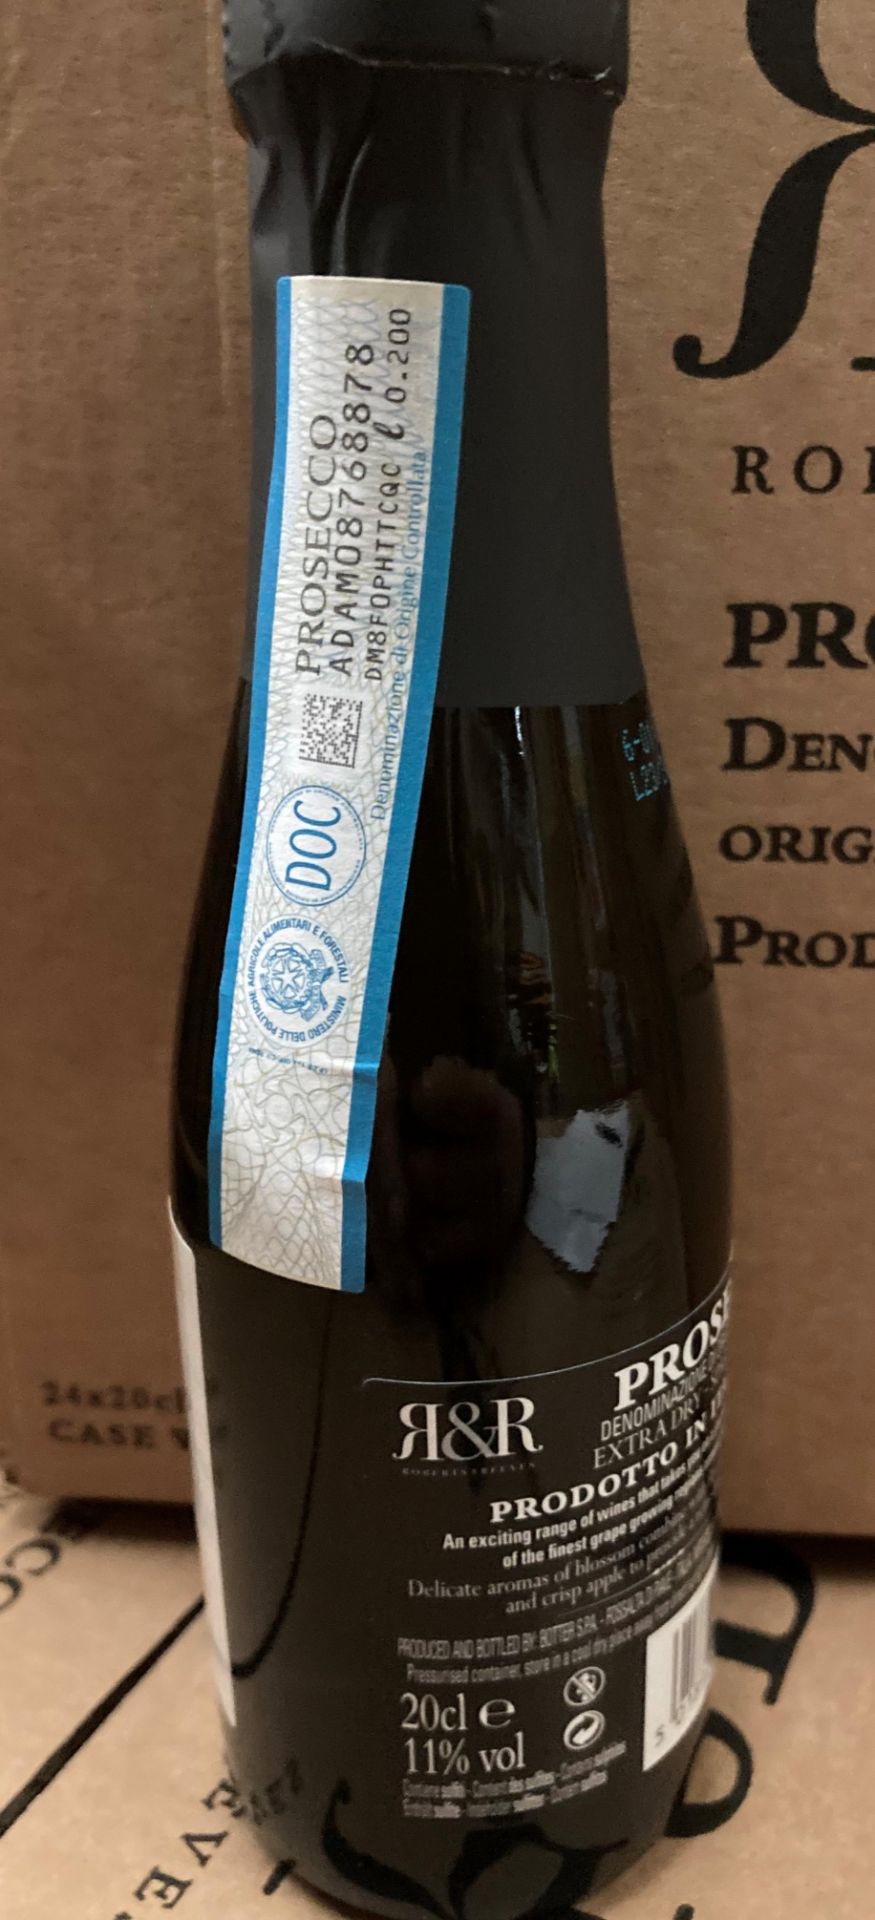 144 x 20cl bottles of Robert & Reeves Extra Dry Prosecco (6 boxes) - Image 3 of 5